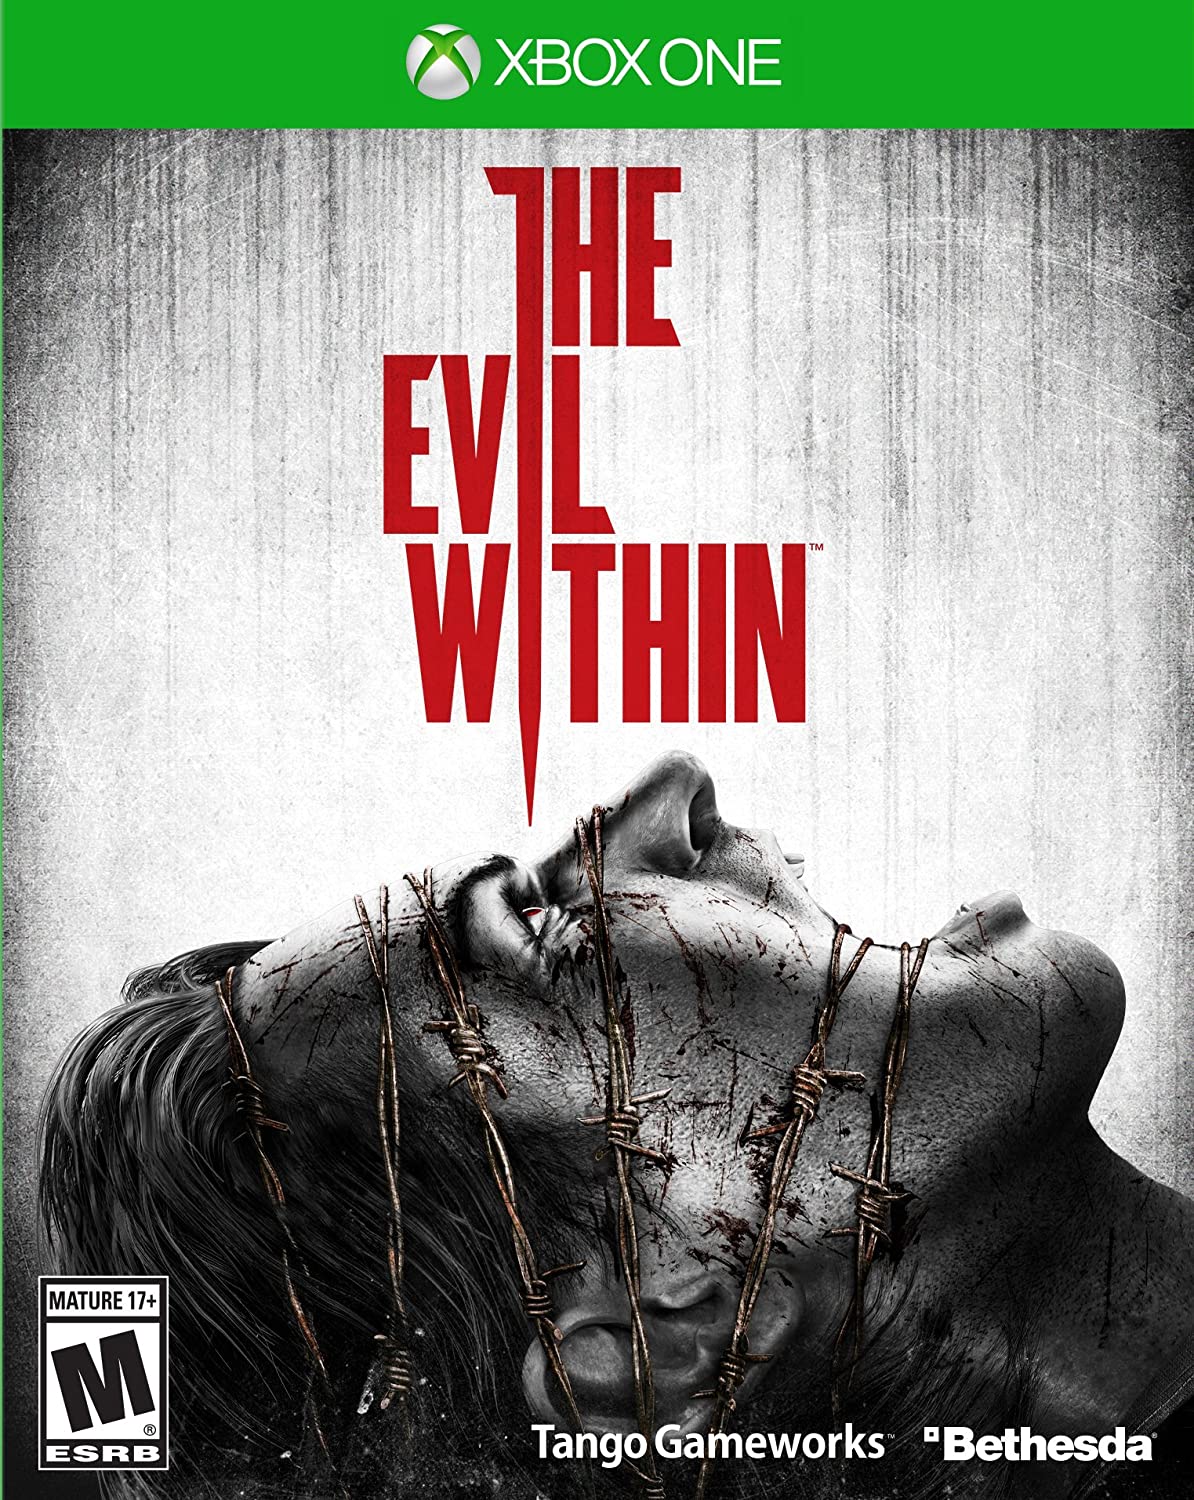 THE EVIL WITHIN.-ONE